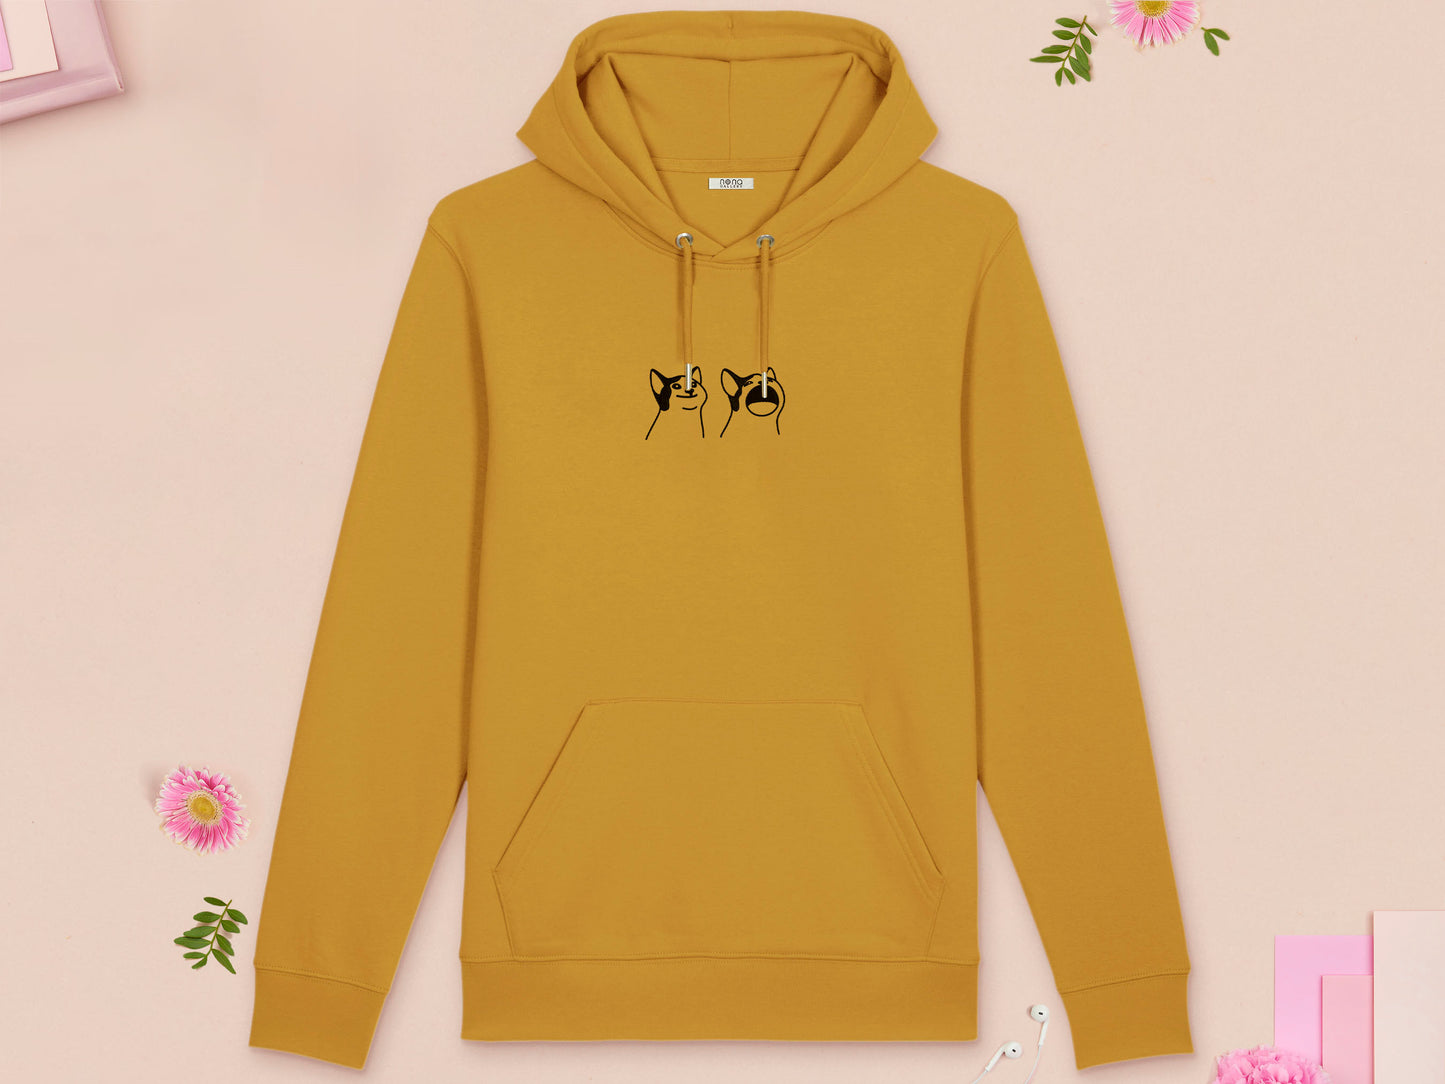 A yellow long sleeved fleece hoodie, with an embroidered black thread design of a cute popcat the cat meme reaction twitch emote